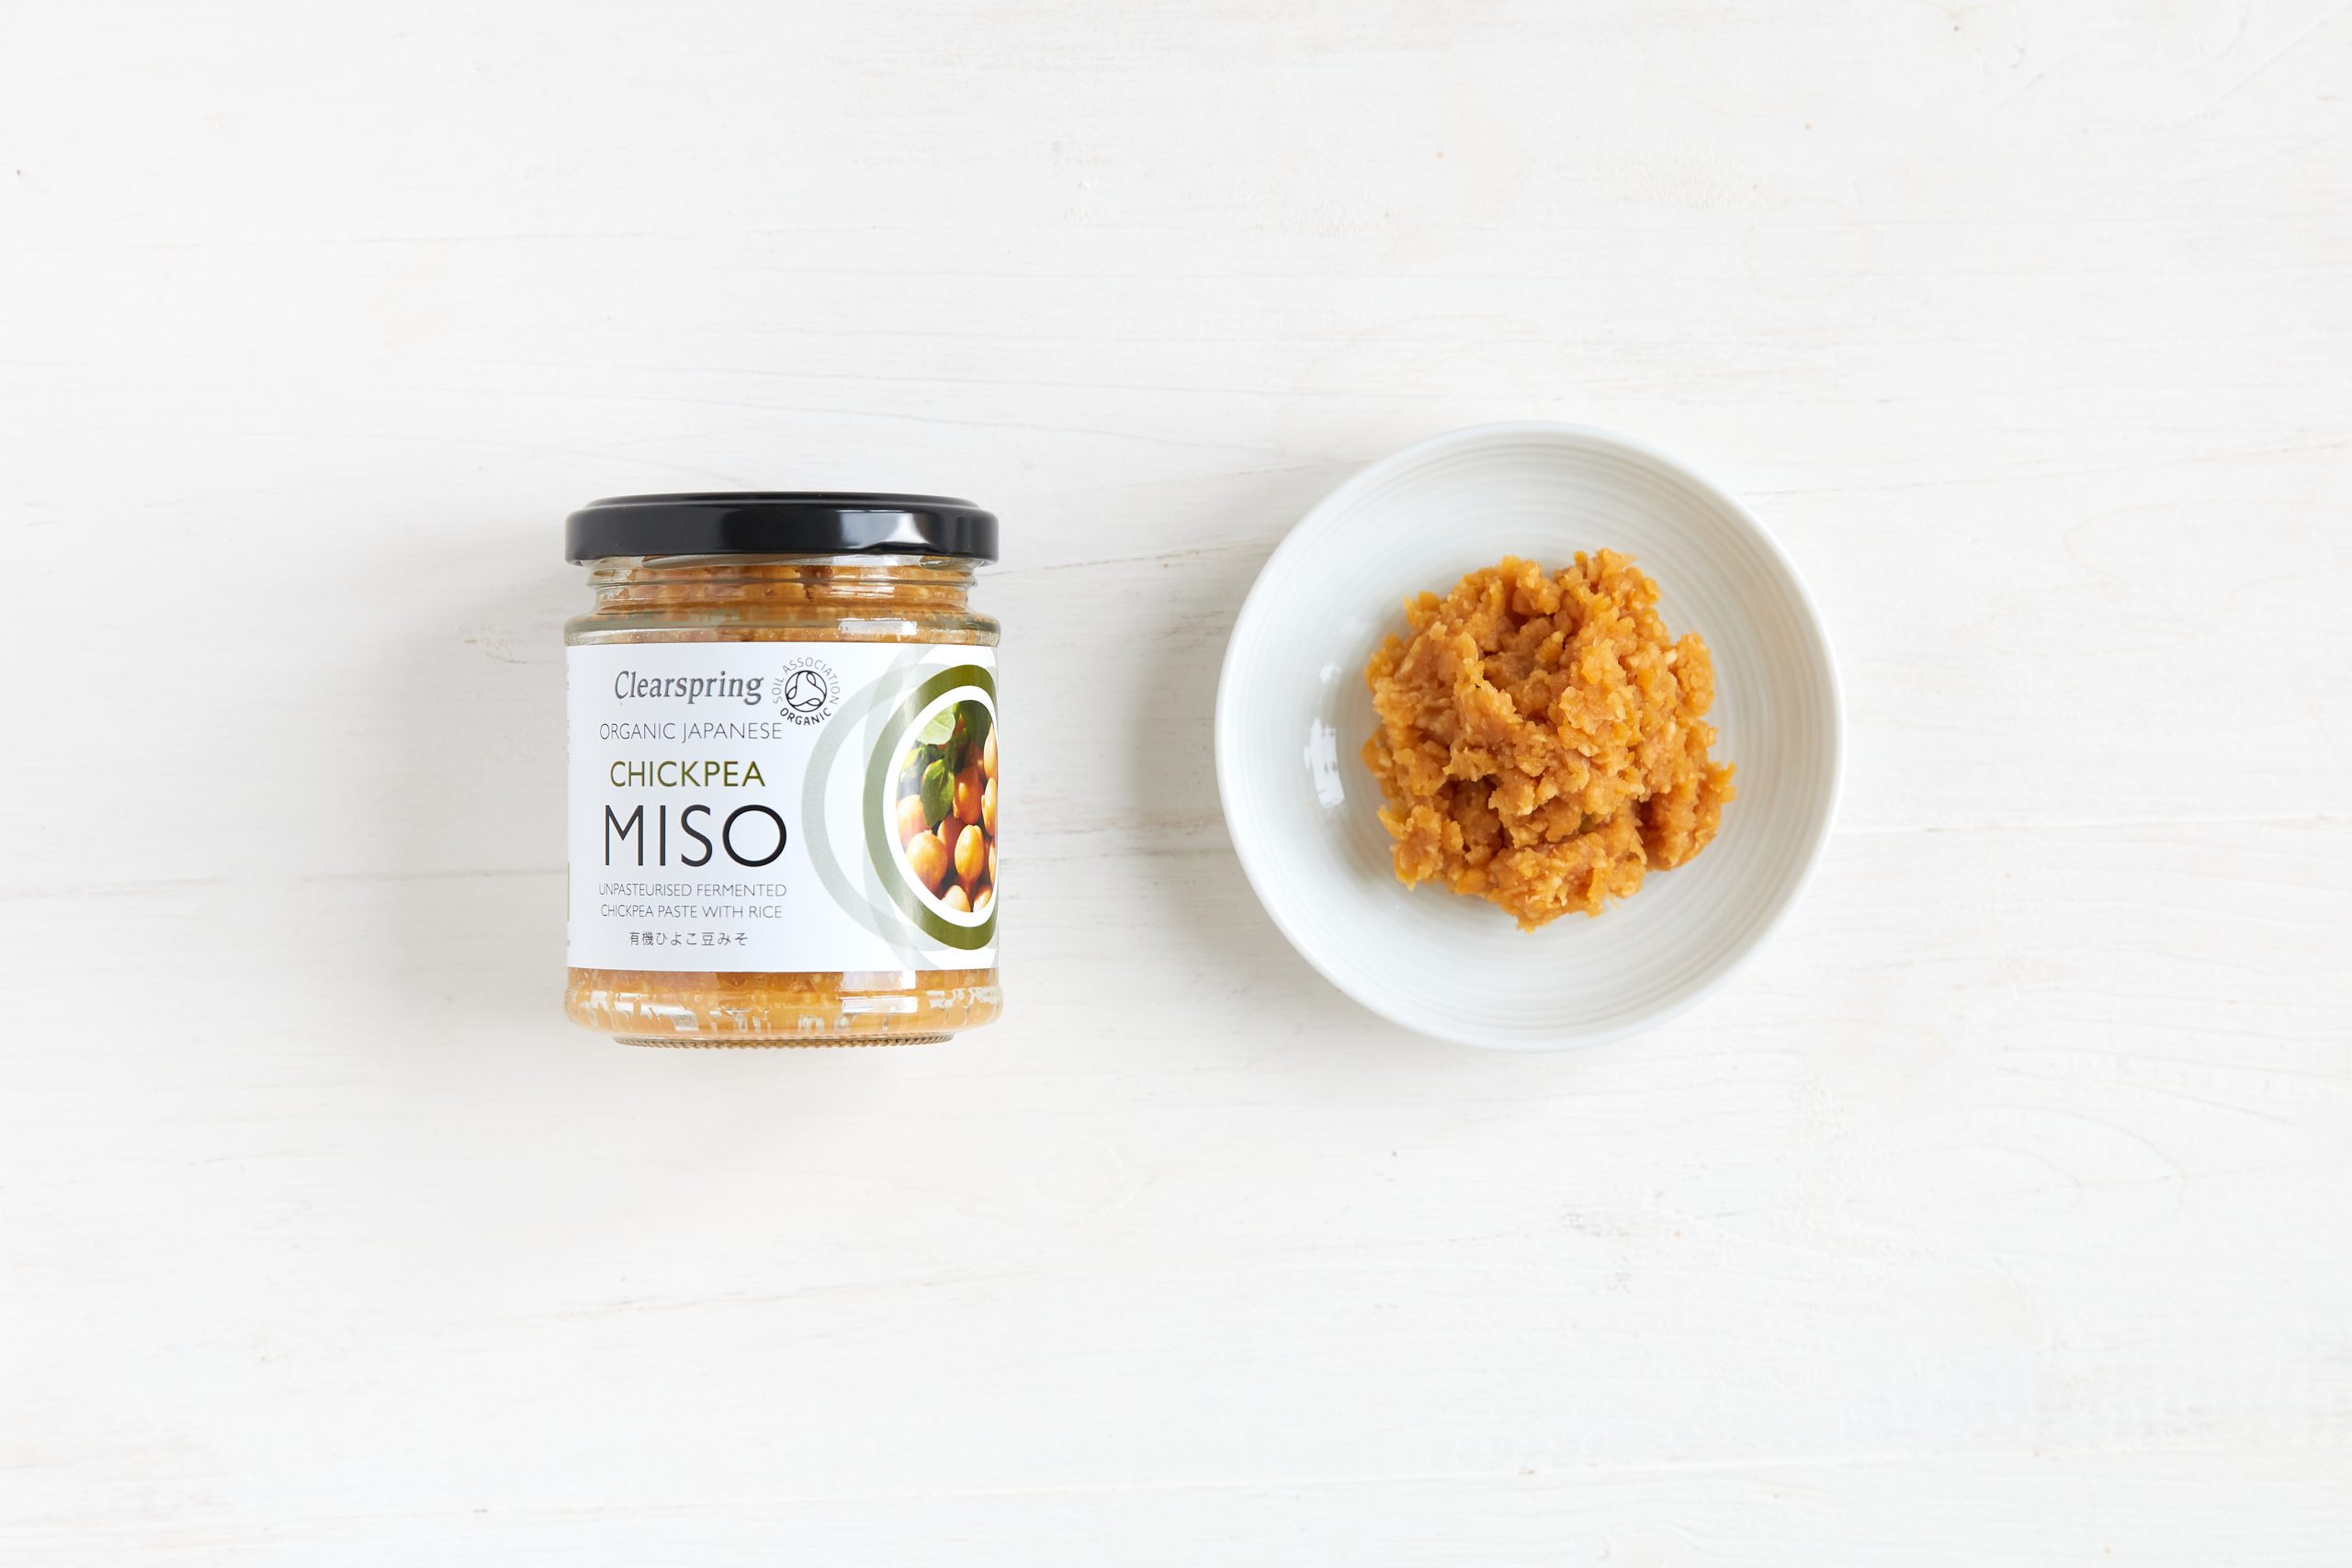 Clearspring launches innovative unpasteurised miso made from organic chickpeas